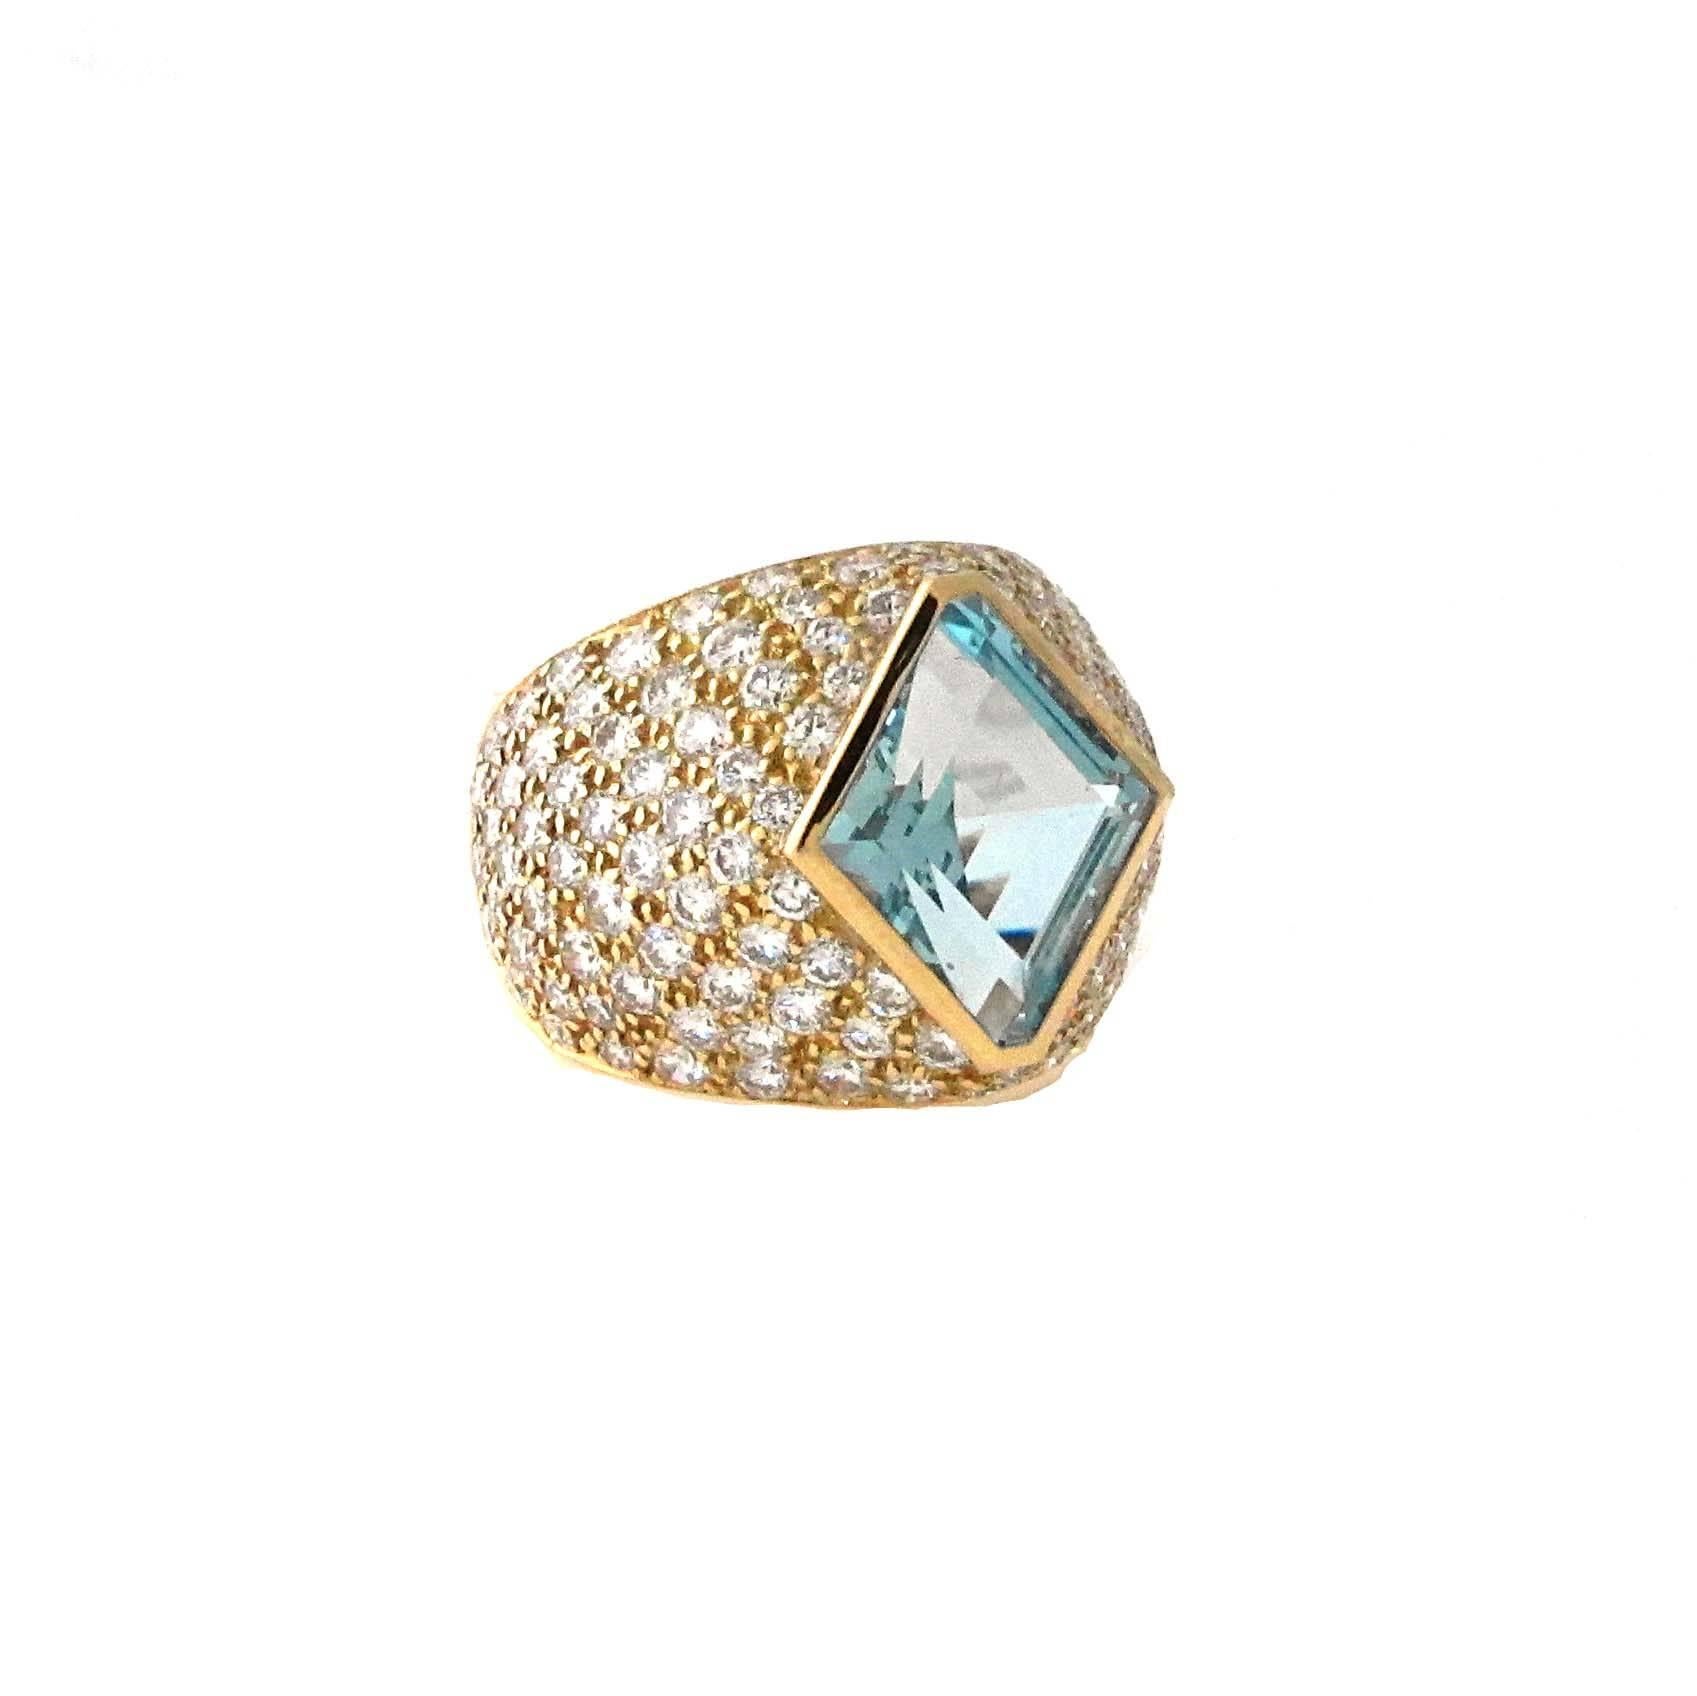 Aquamarine is the stone of the year after Meghan Markle wore one at the Royal Wedding. This 3.74 carat lozenge shaped aqua is set in a gorgeous 18kt yellow gold and diamond mounting. The ring is approximately a size 6 but can be sized up or down 1/2